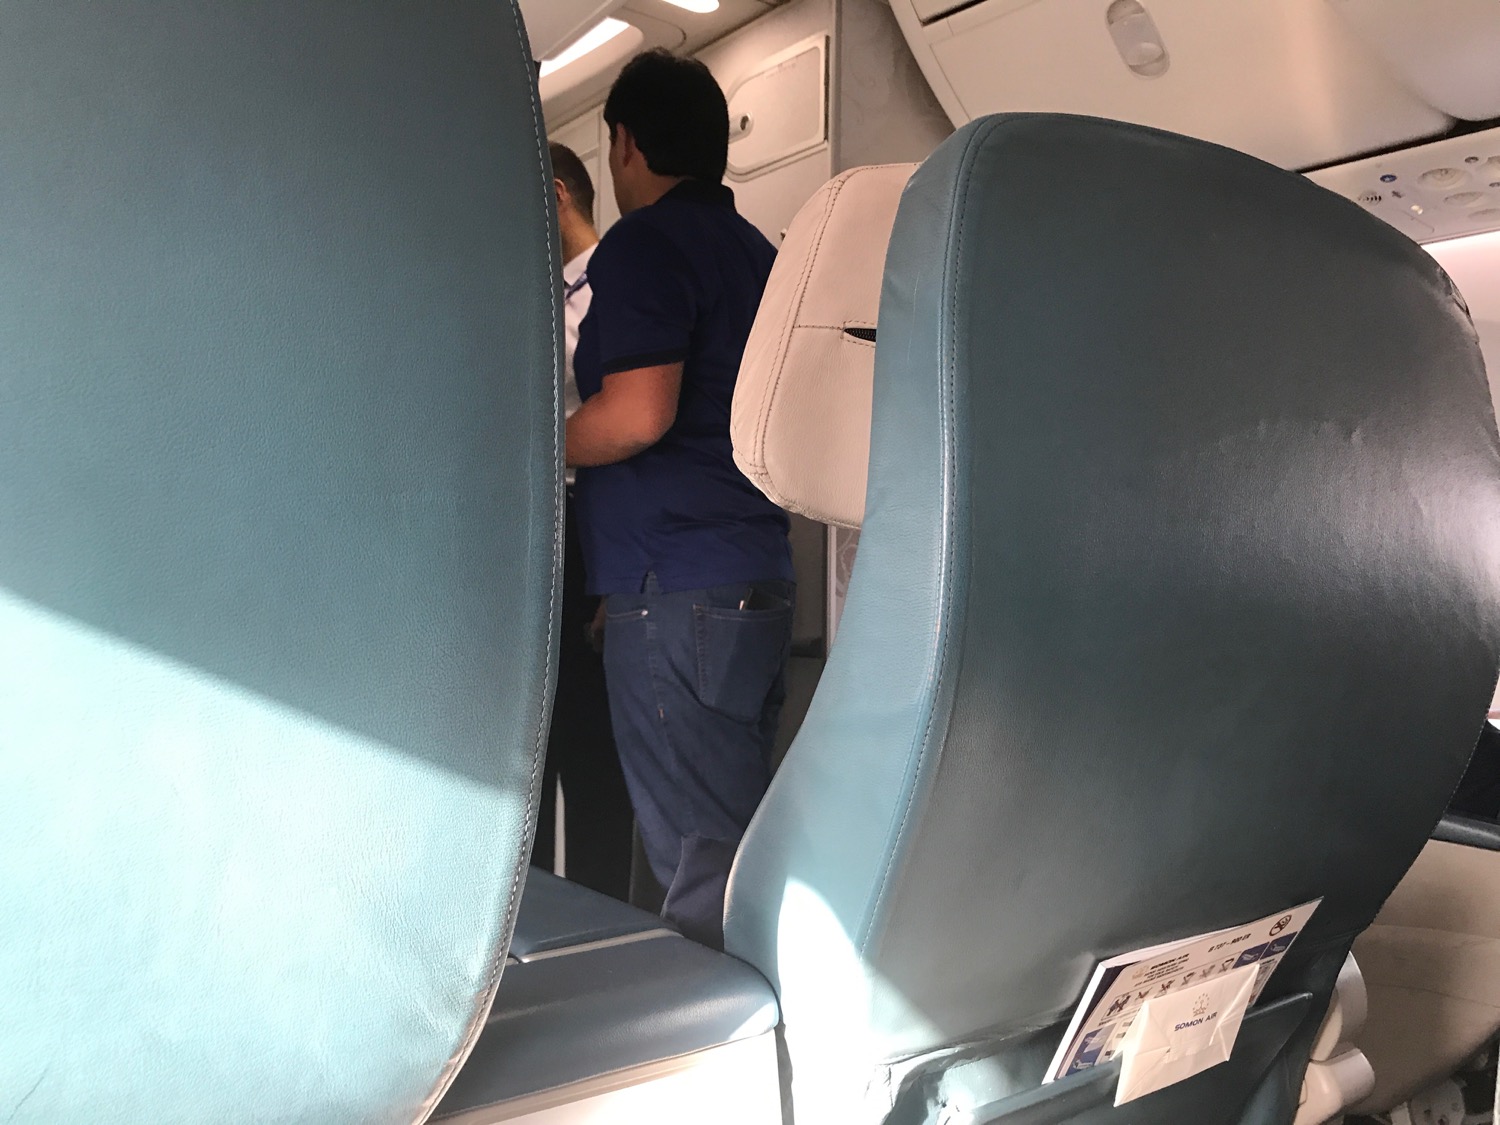 a man standing in a plane